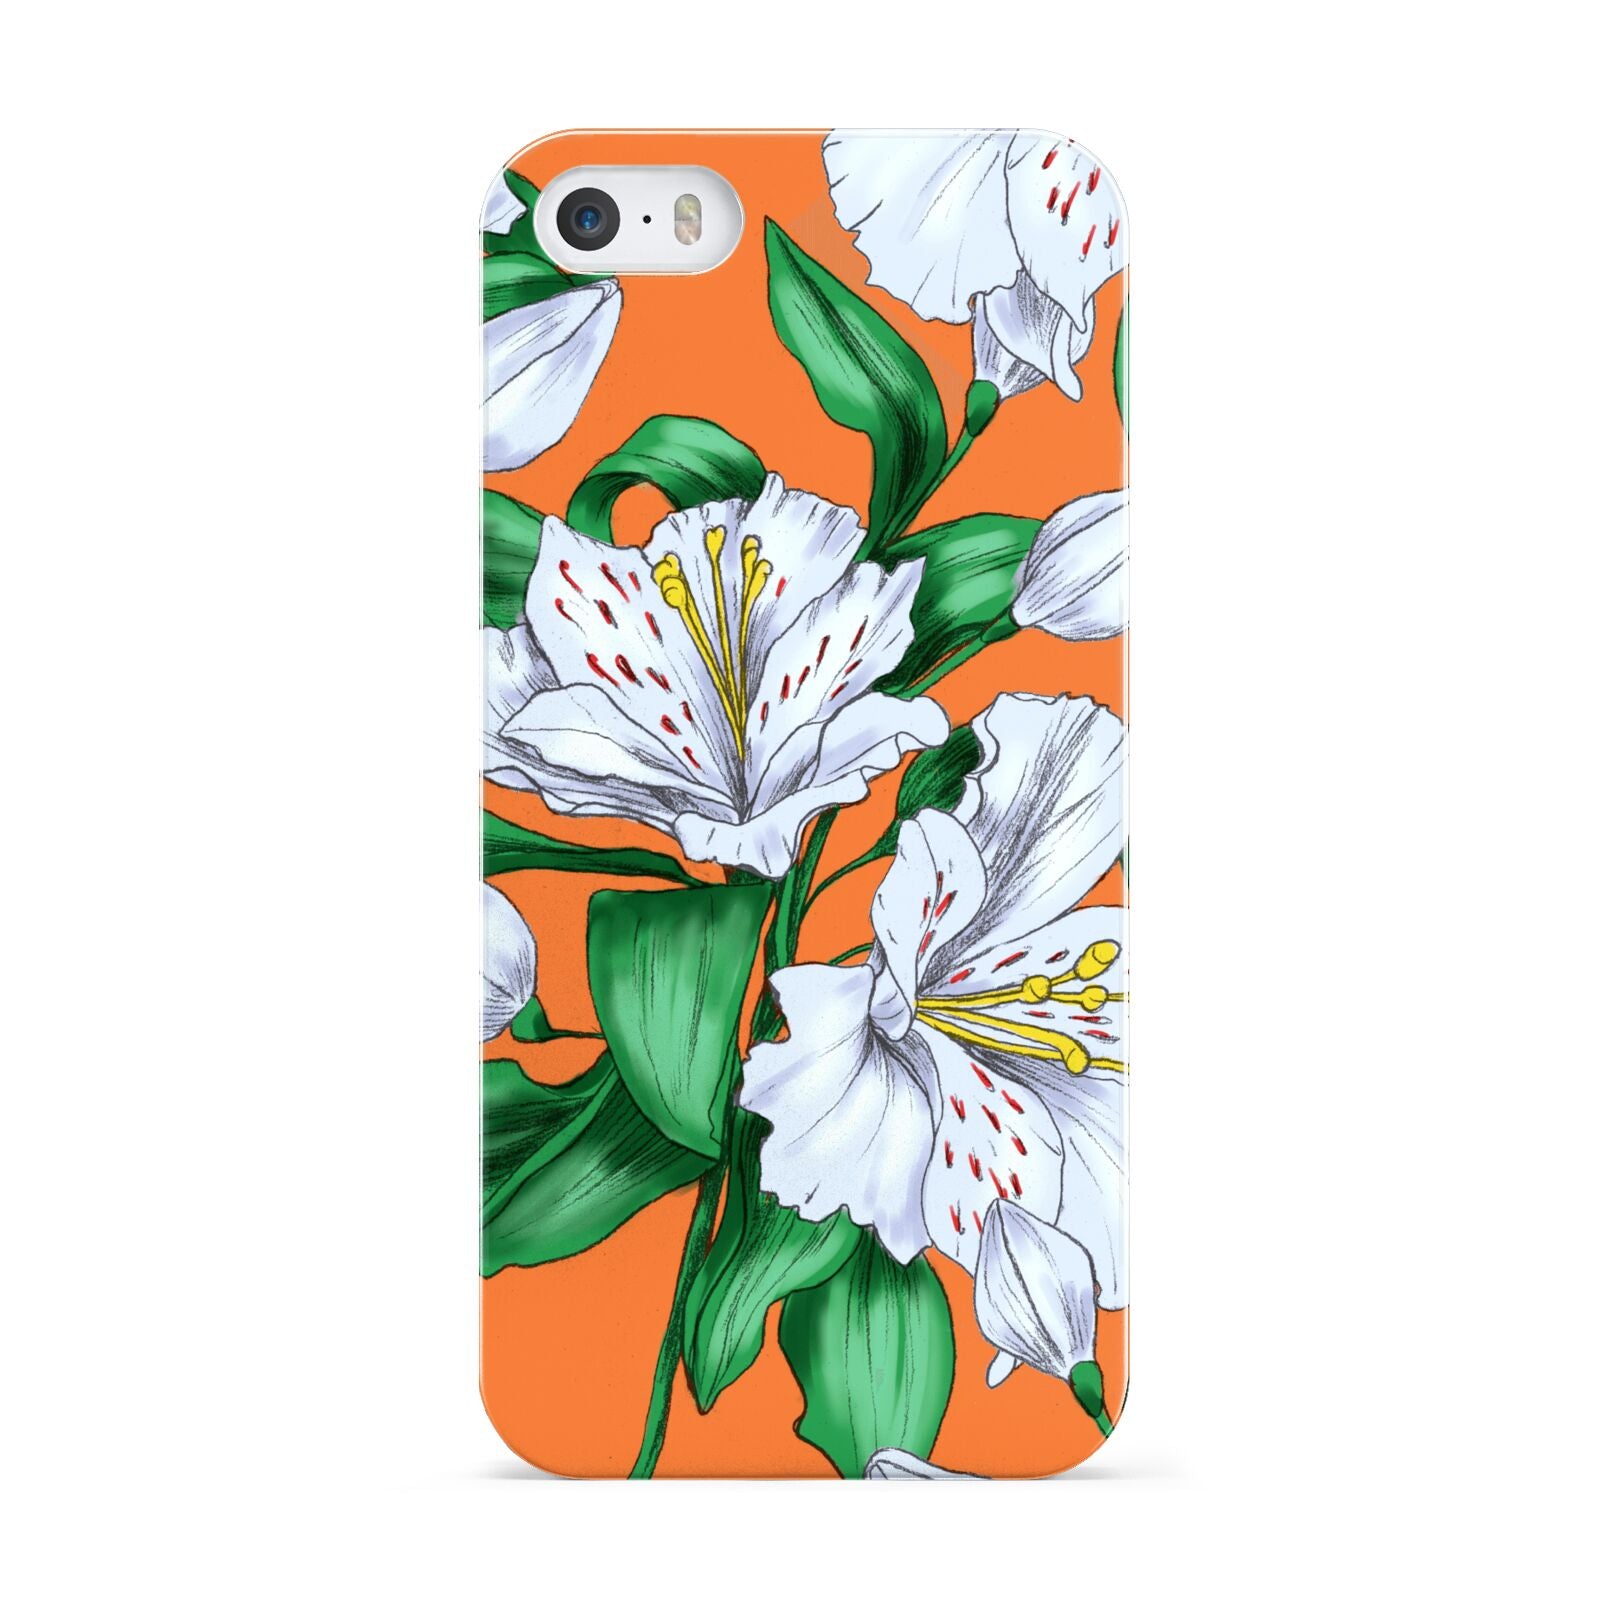 Lily Apple iPhone 5 Case